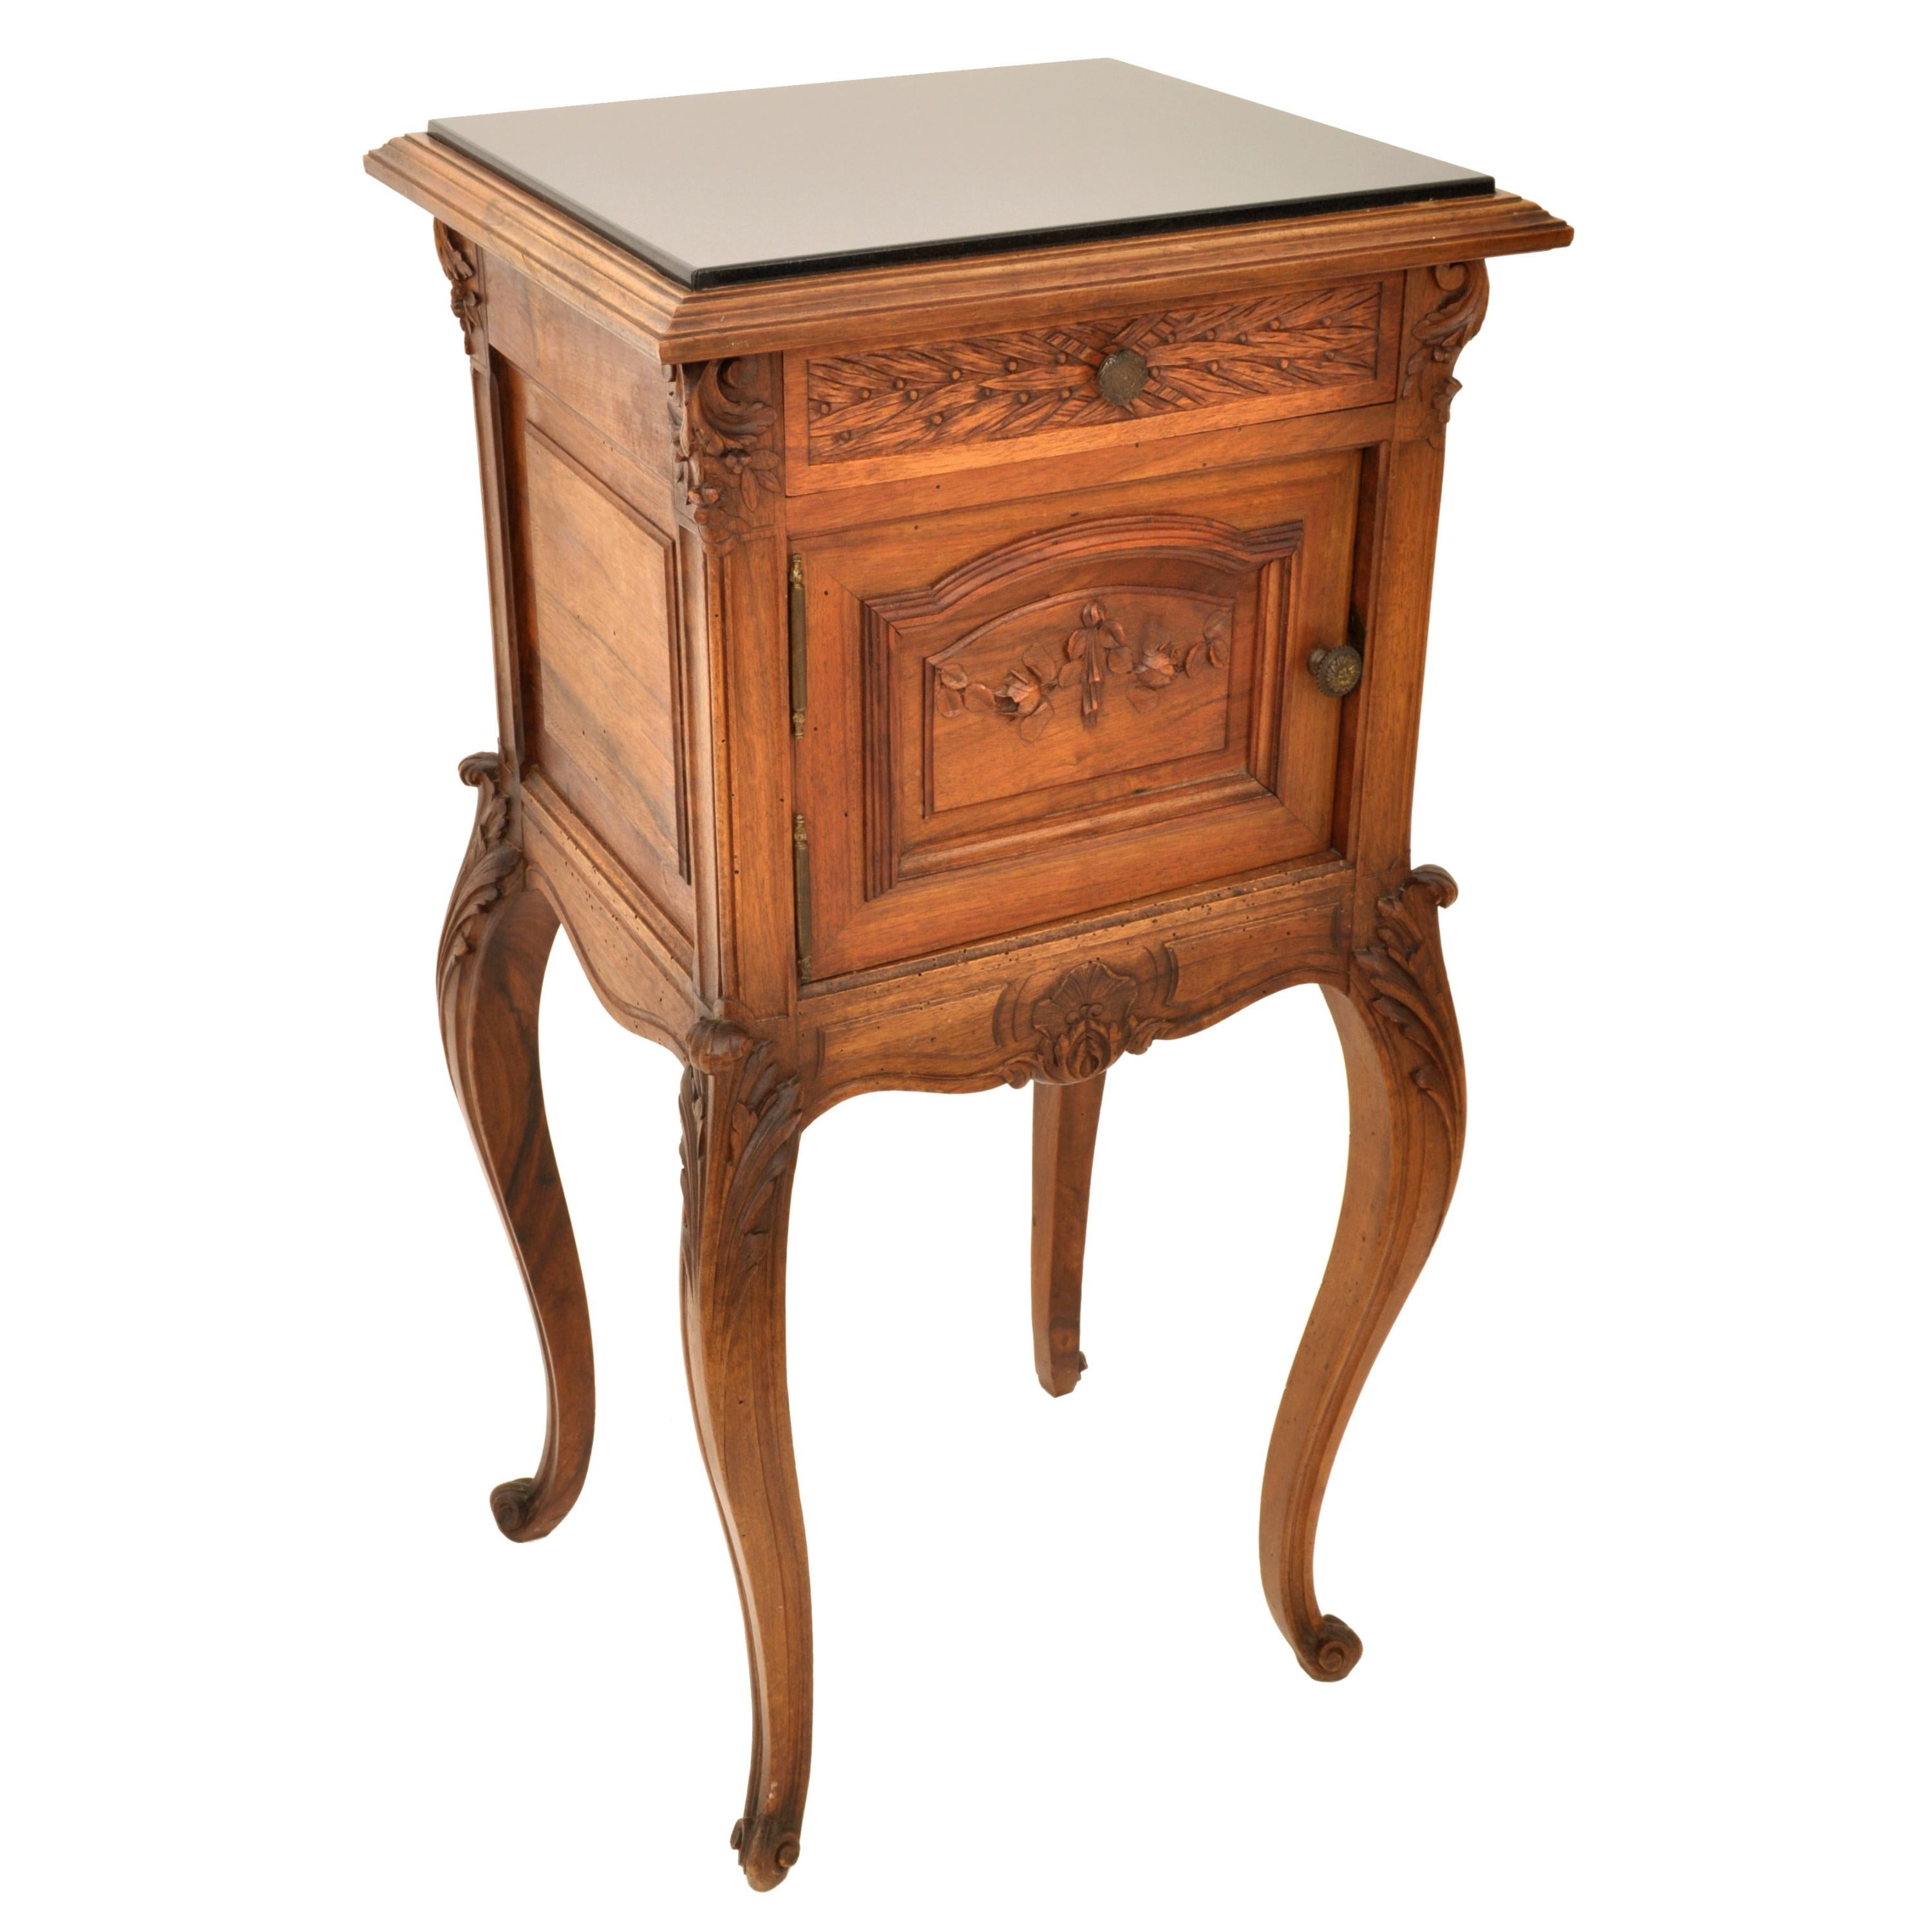 Antique French Provincial Louis XVI Carved Walnut & Marble Nightstand Table 1880 For Sale 3